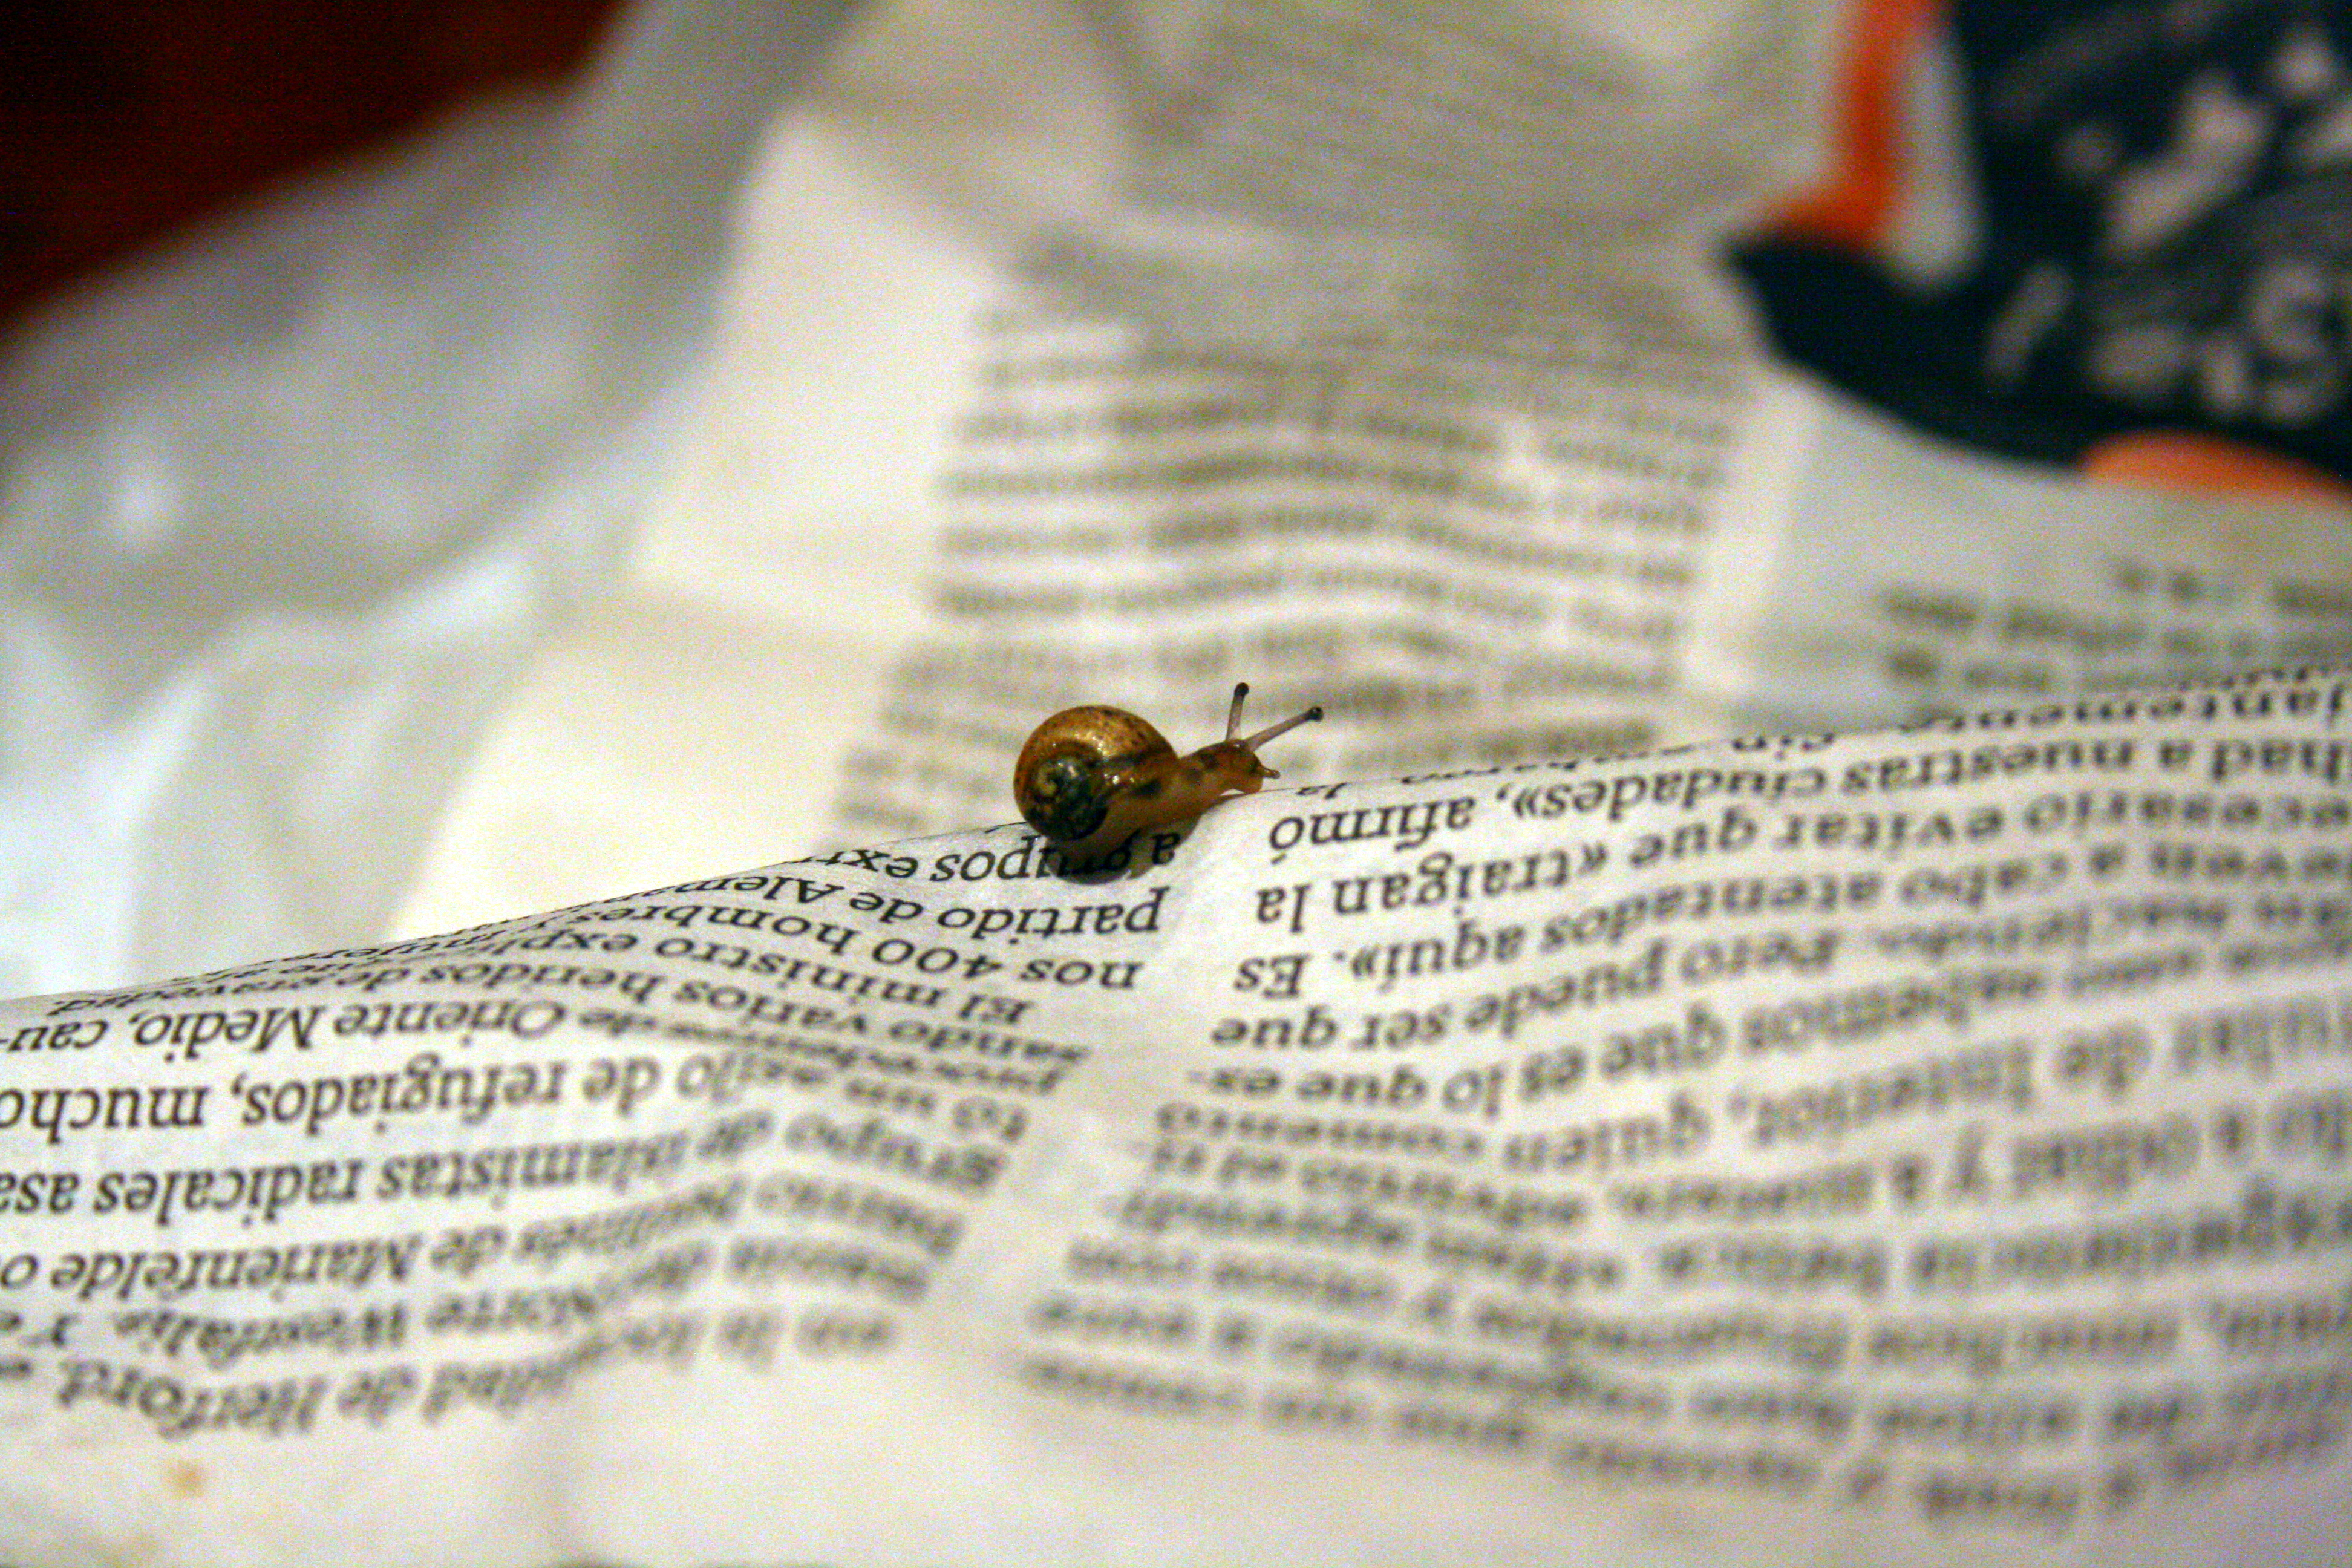 Te Libro de Todo Mal was the old blog's name, and this snail was called Jardiel.